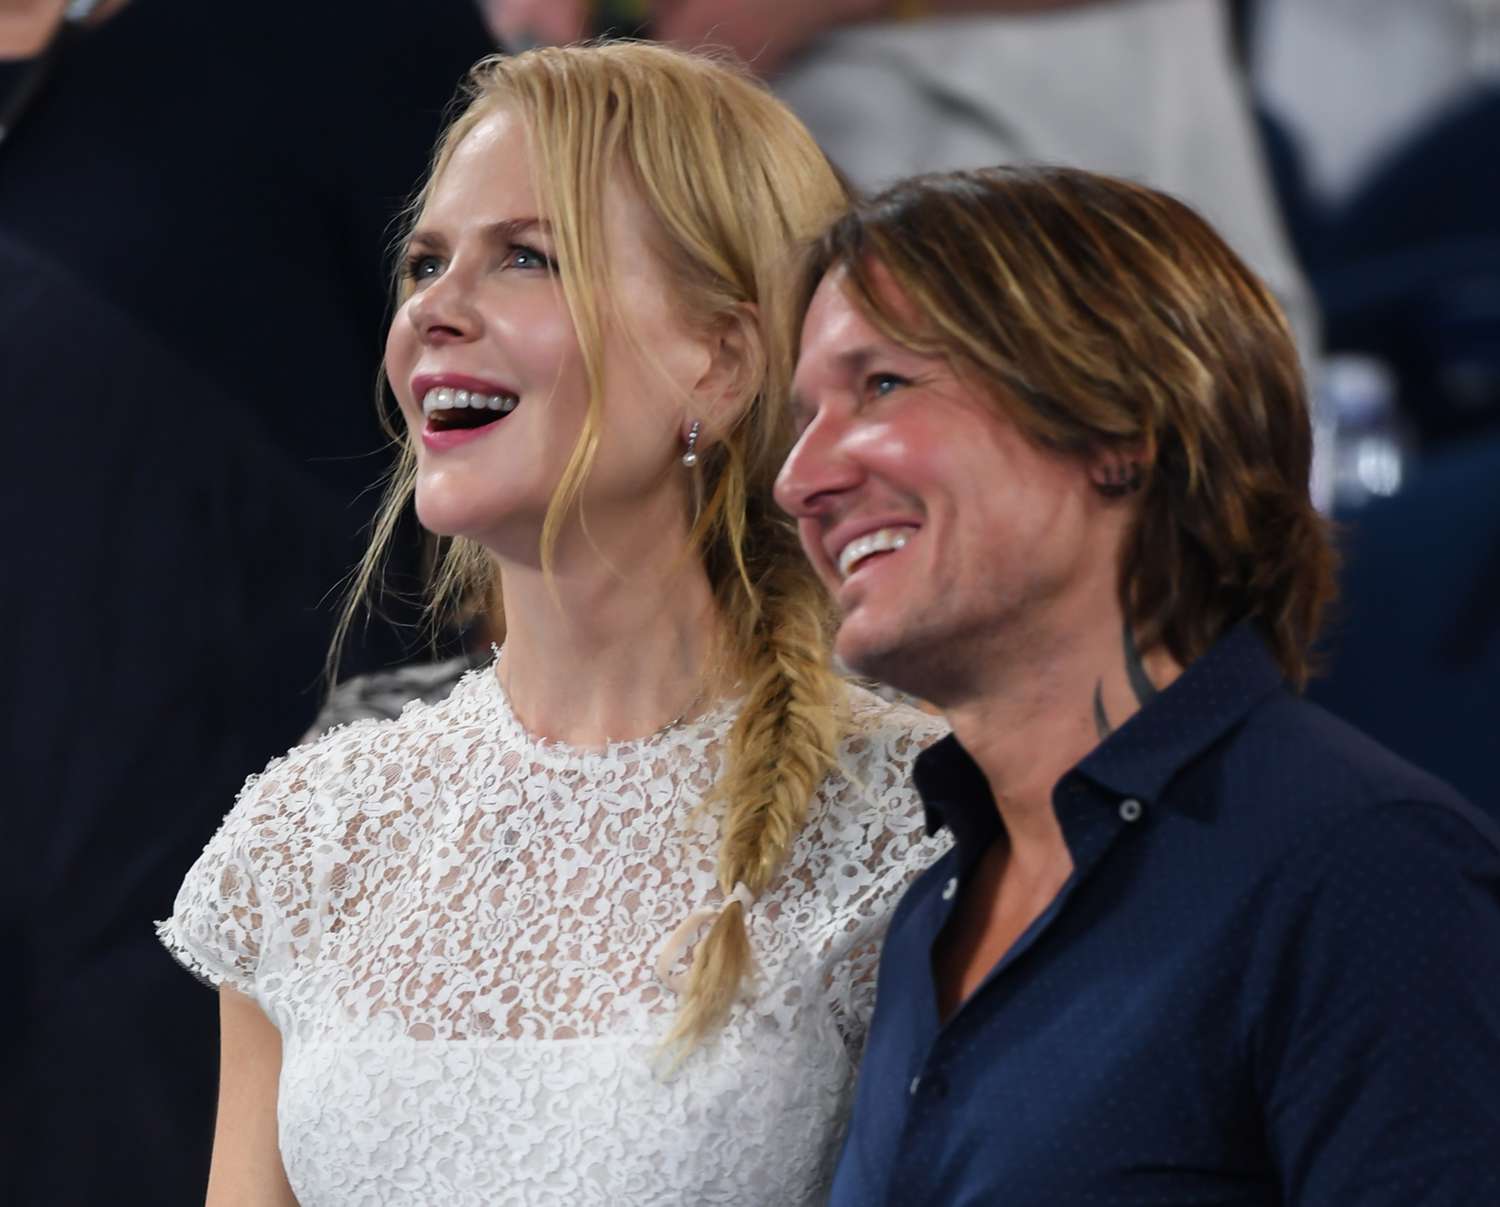 Nicole Kidman and husband Keith Urban watch Anna Wintour on court receiving the Australian Open inspiration for 2019 as they attend the 2019 Australian Open at Melbourne Park on January 24, 2019 in Melbourne, Australia